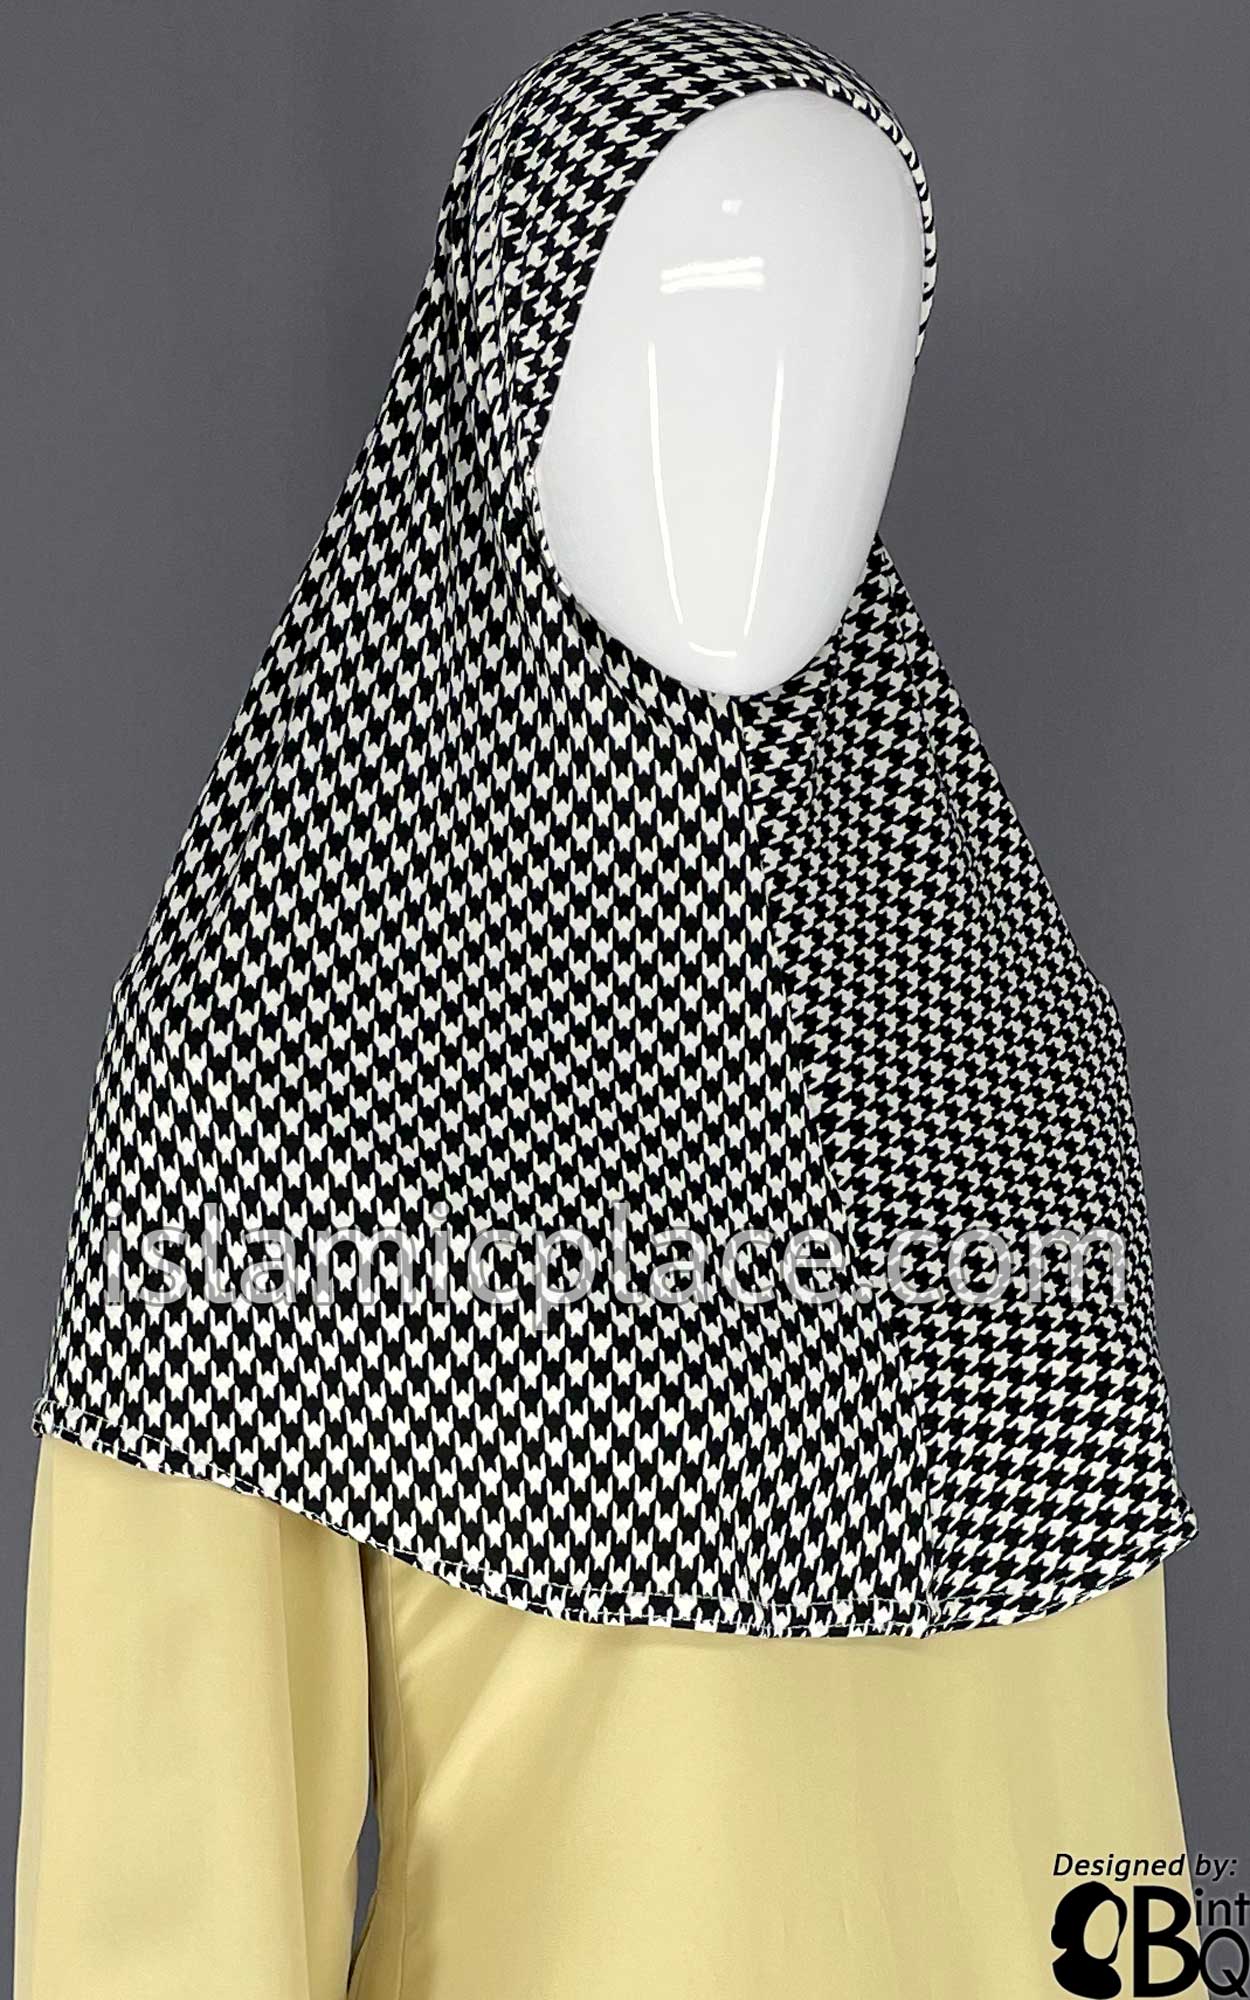 Black and White Houndstooth Pattern - Printed Teen to Adult (Large) Hijab Al-Amira (1-piece style)